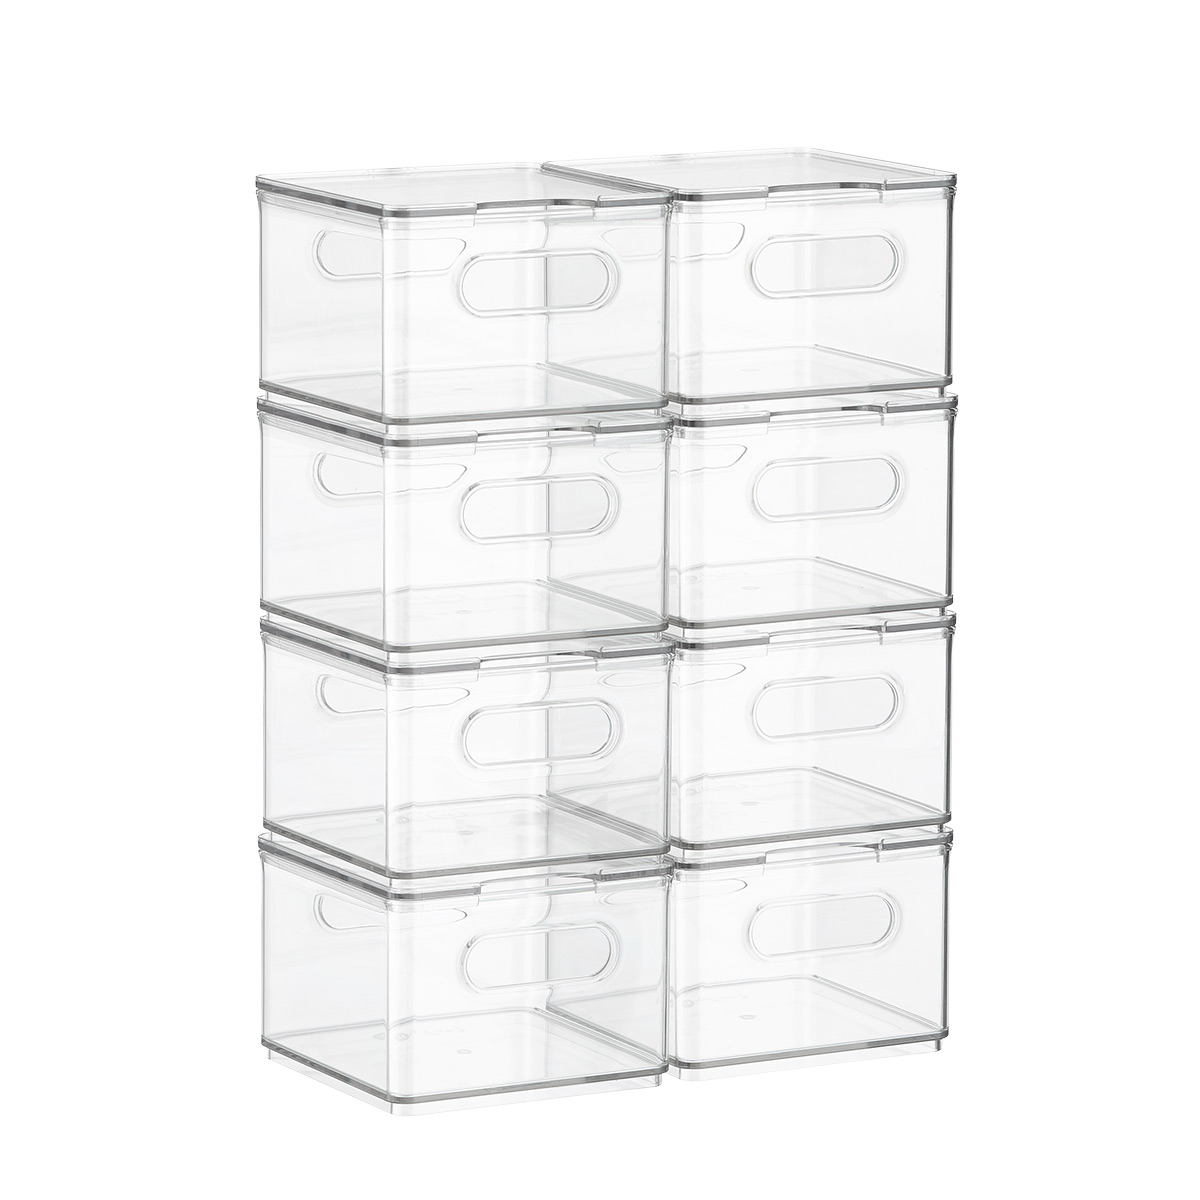 https://www.containerstore.com/catalogimages/406662/10082472-The-Home-Edit-small-fridge-.jpg